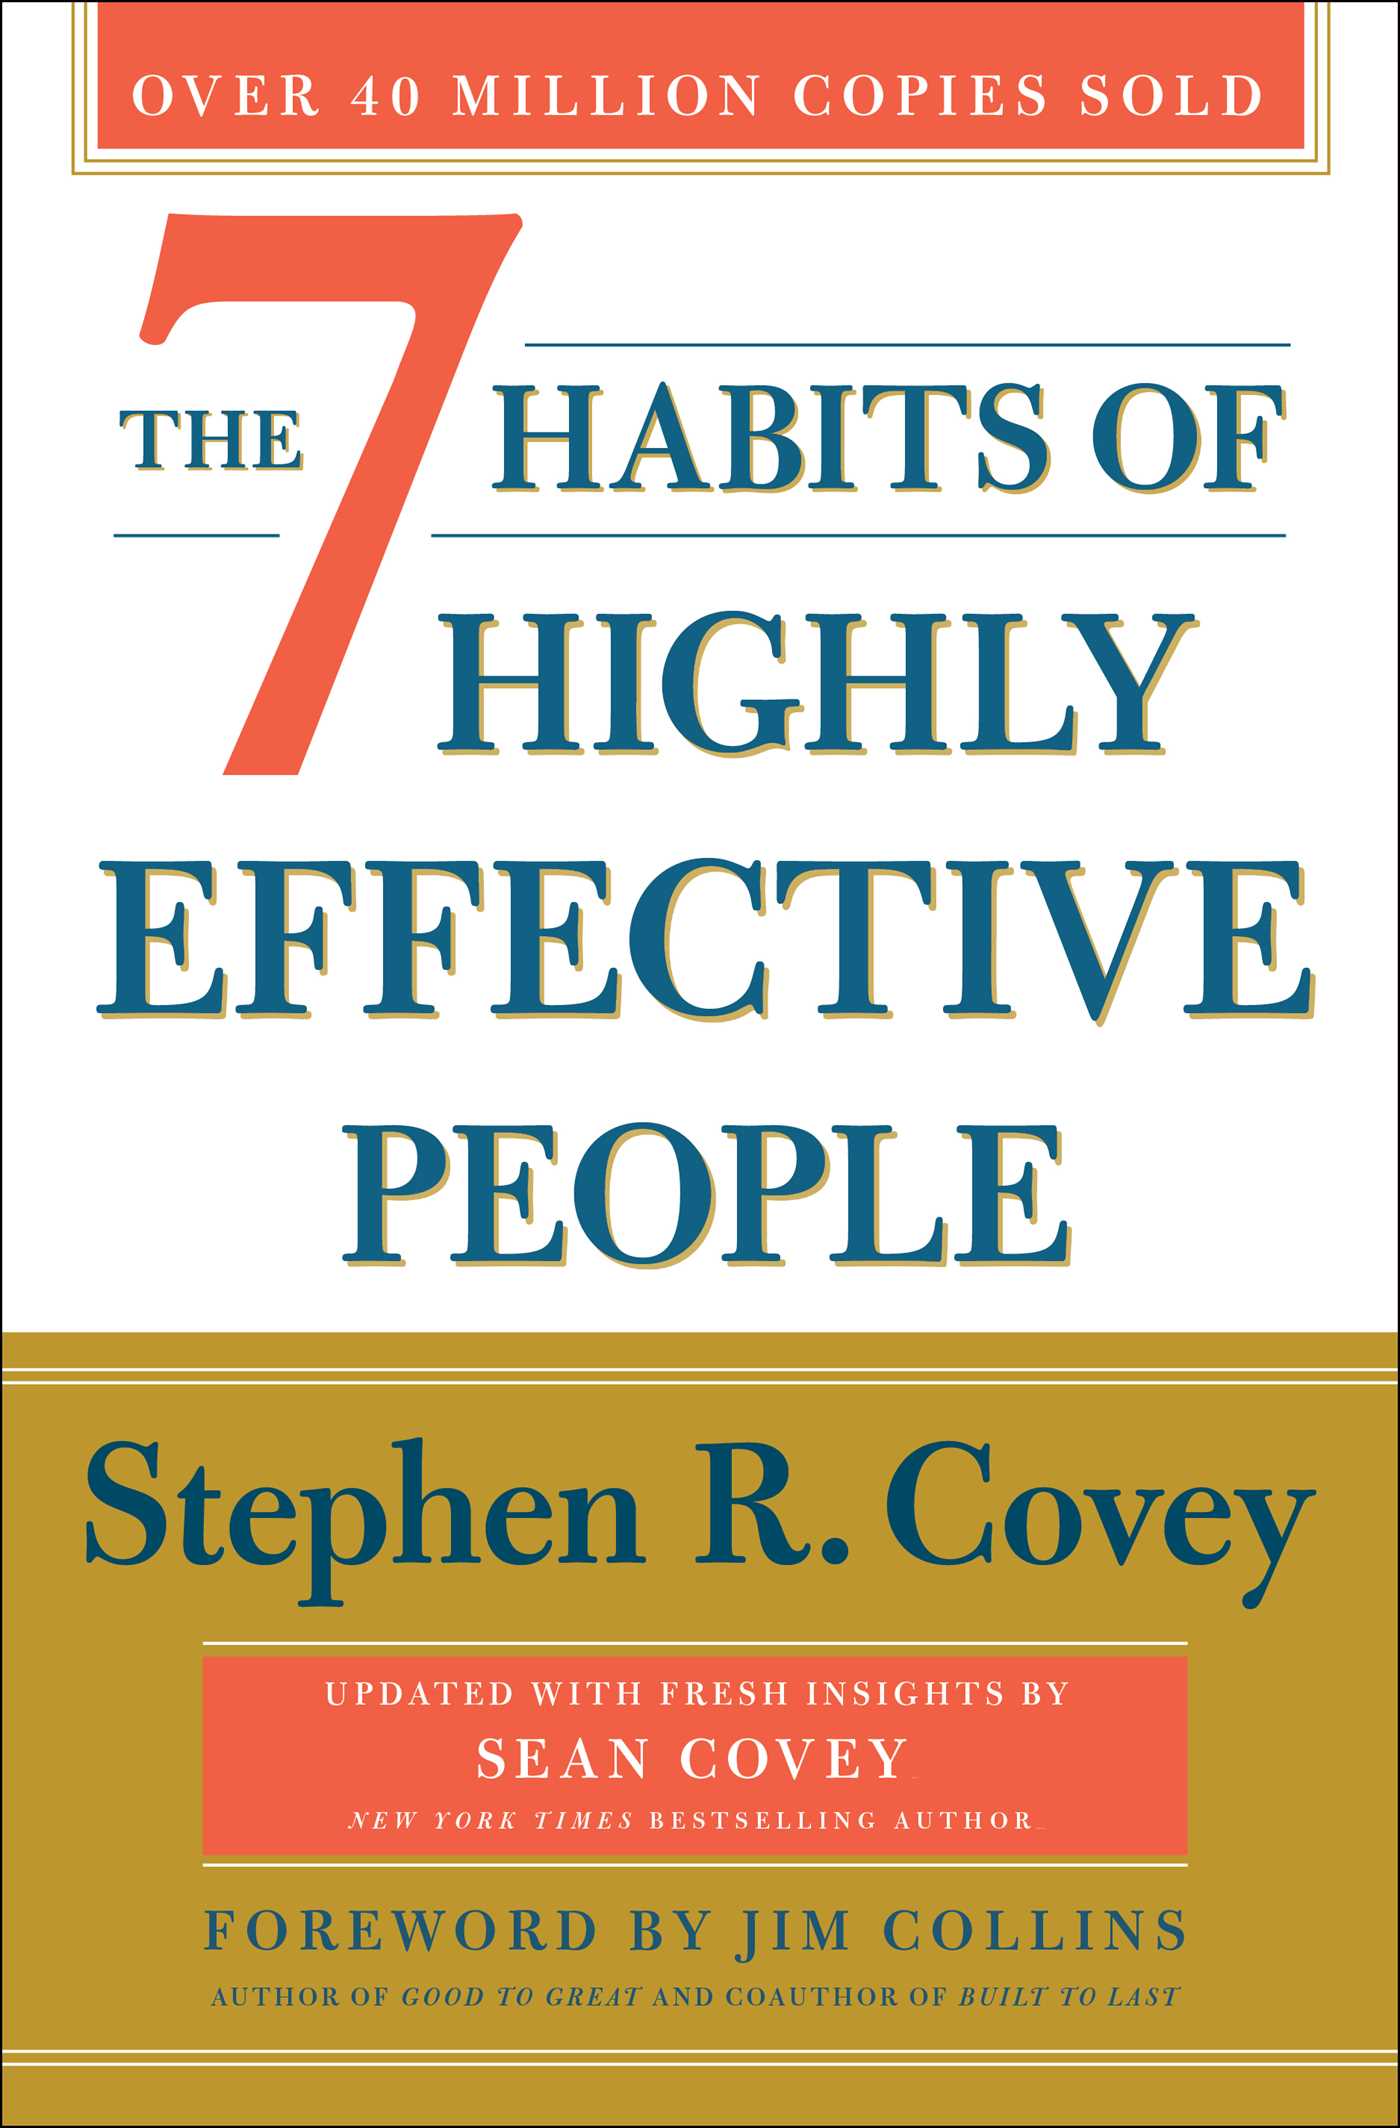 The book cover for The 7 Habits of Highly Effective People.